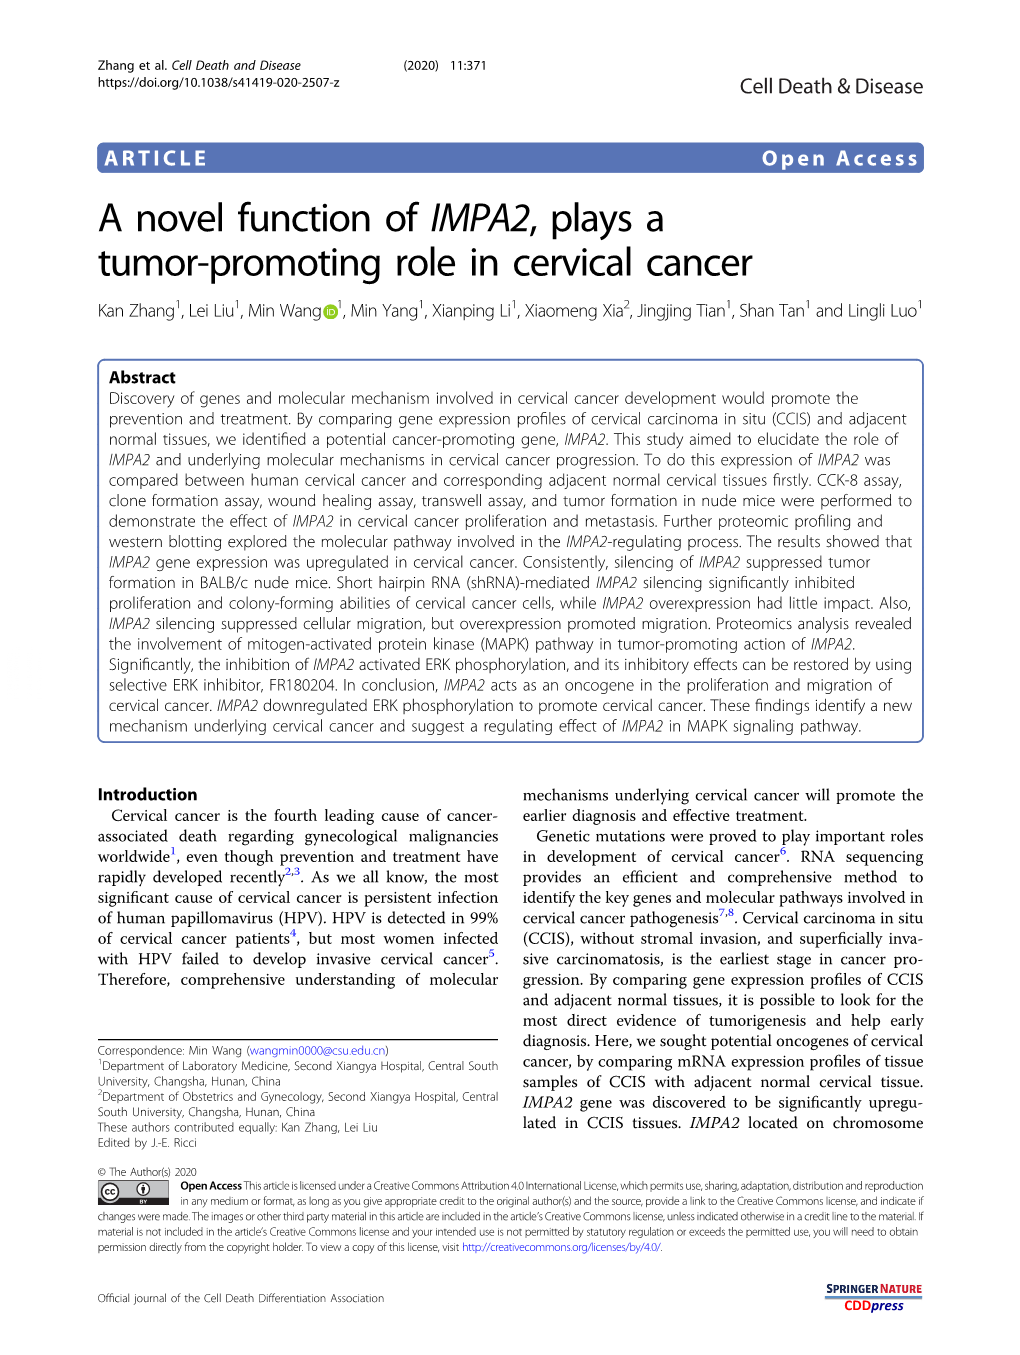 A Novel Function of IMPA2, Plays a Tumor-Promoting Role in Cervical